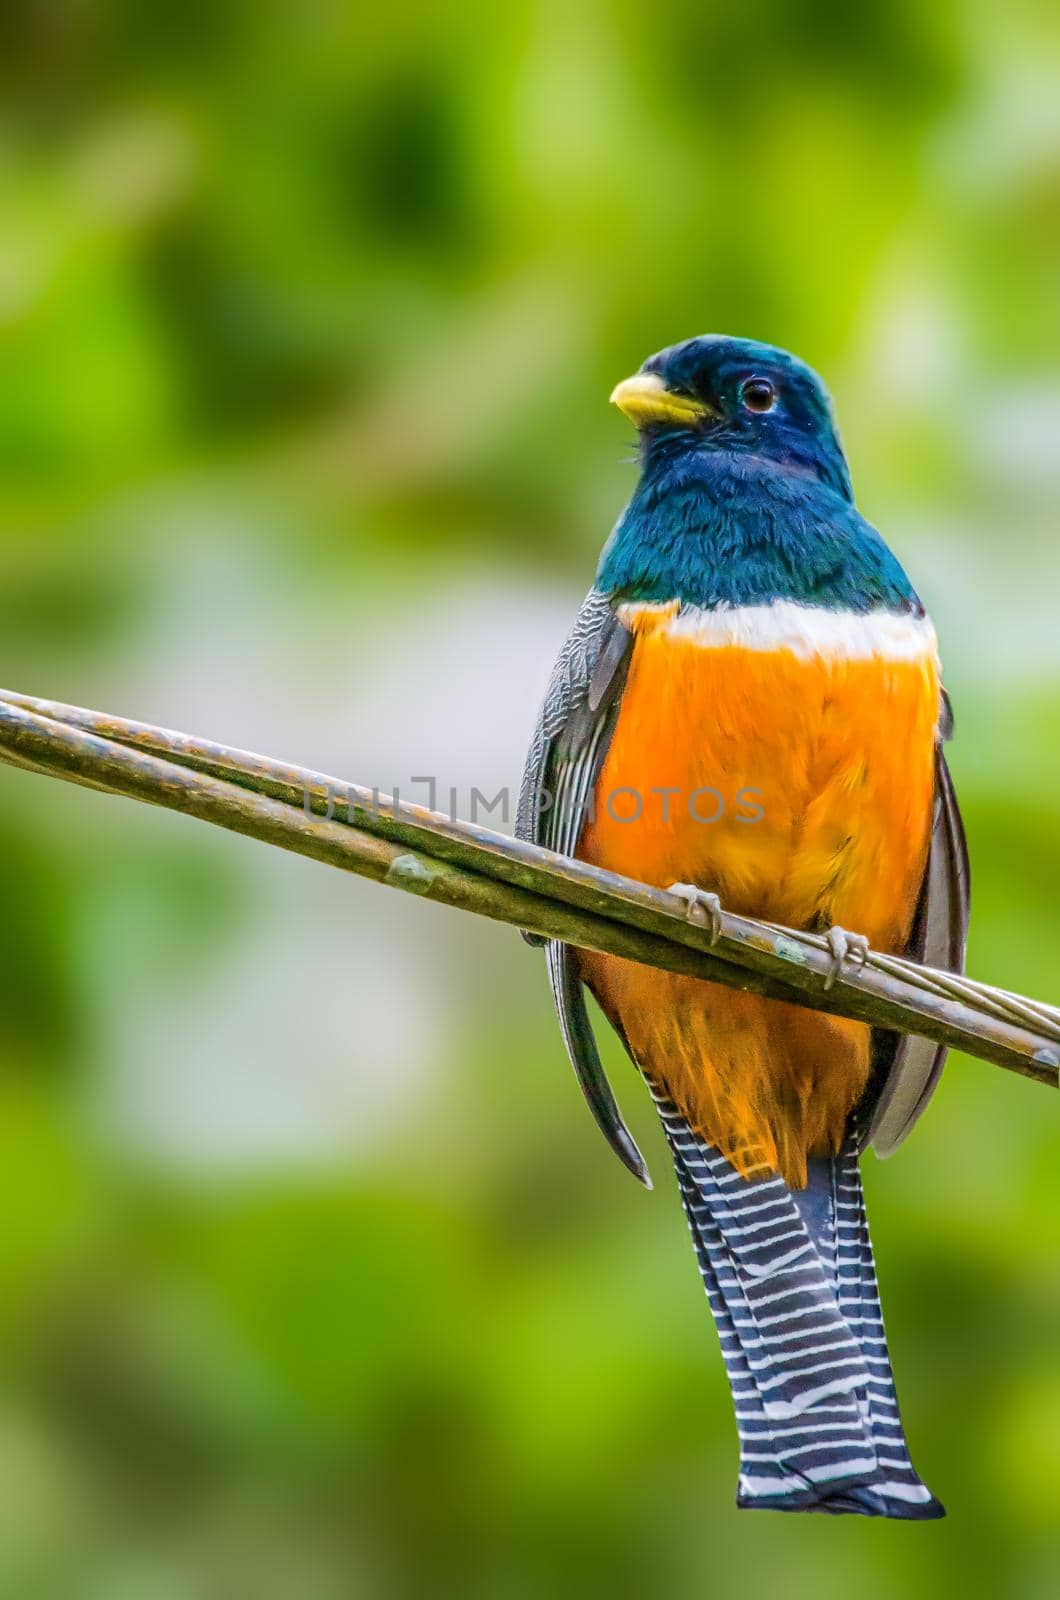 Orange-bellied Trogon are often seen in the highlands of central and southern Costa Rica